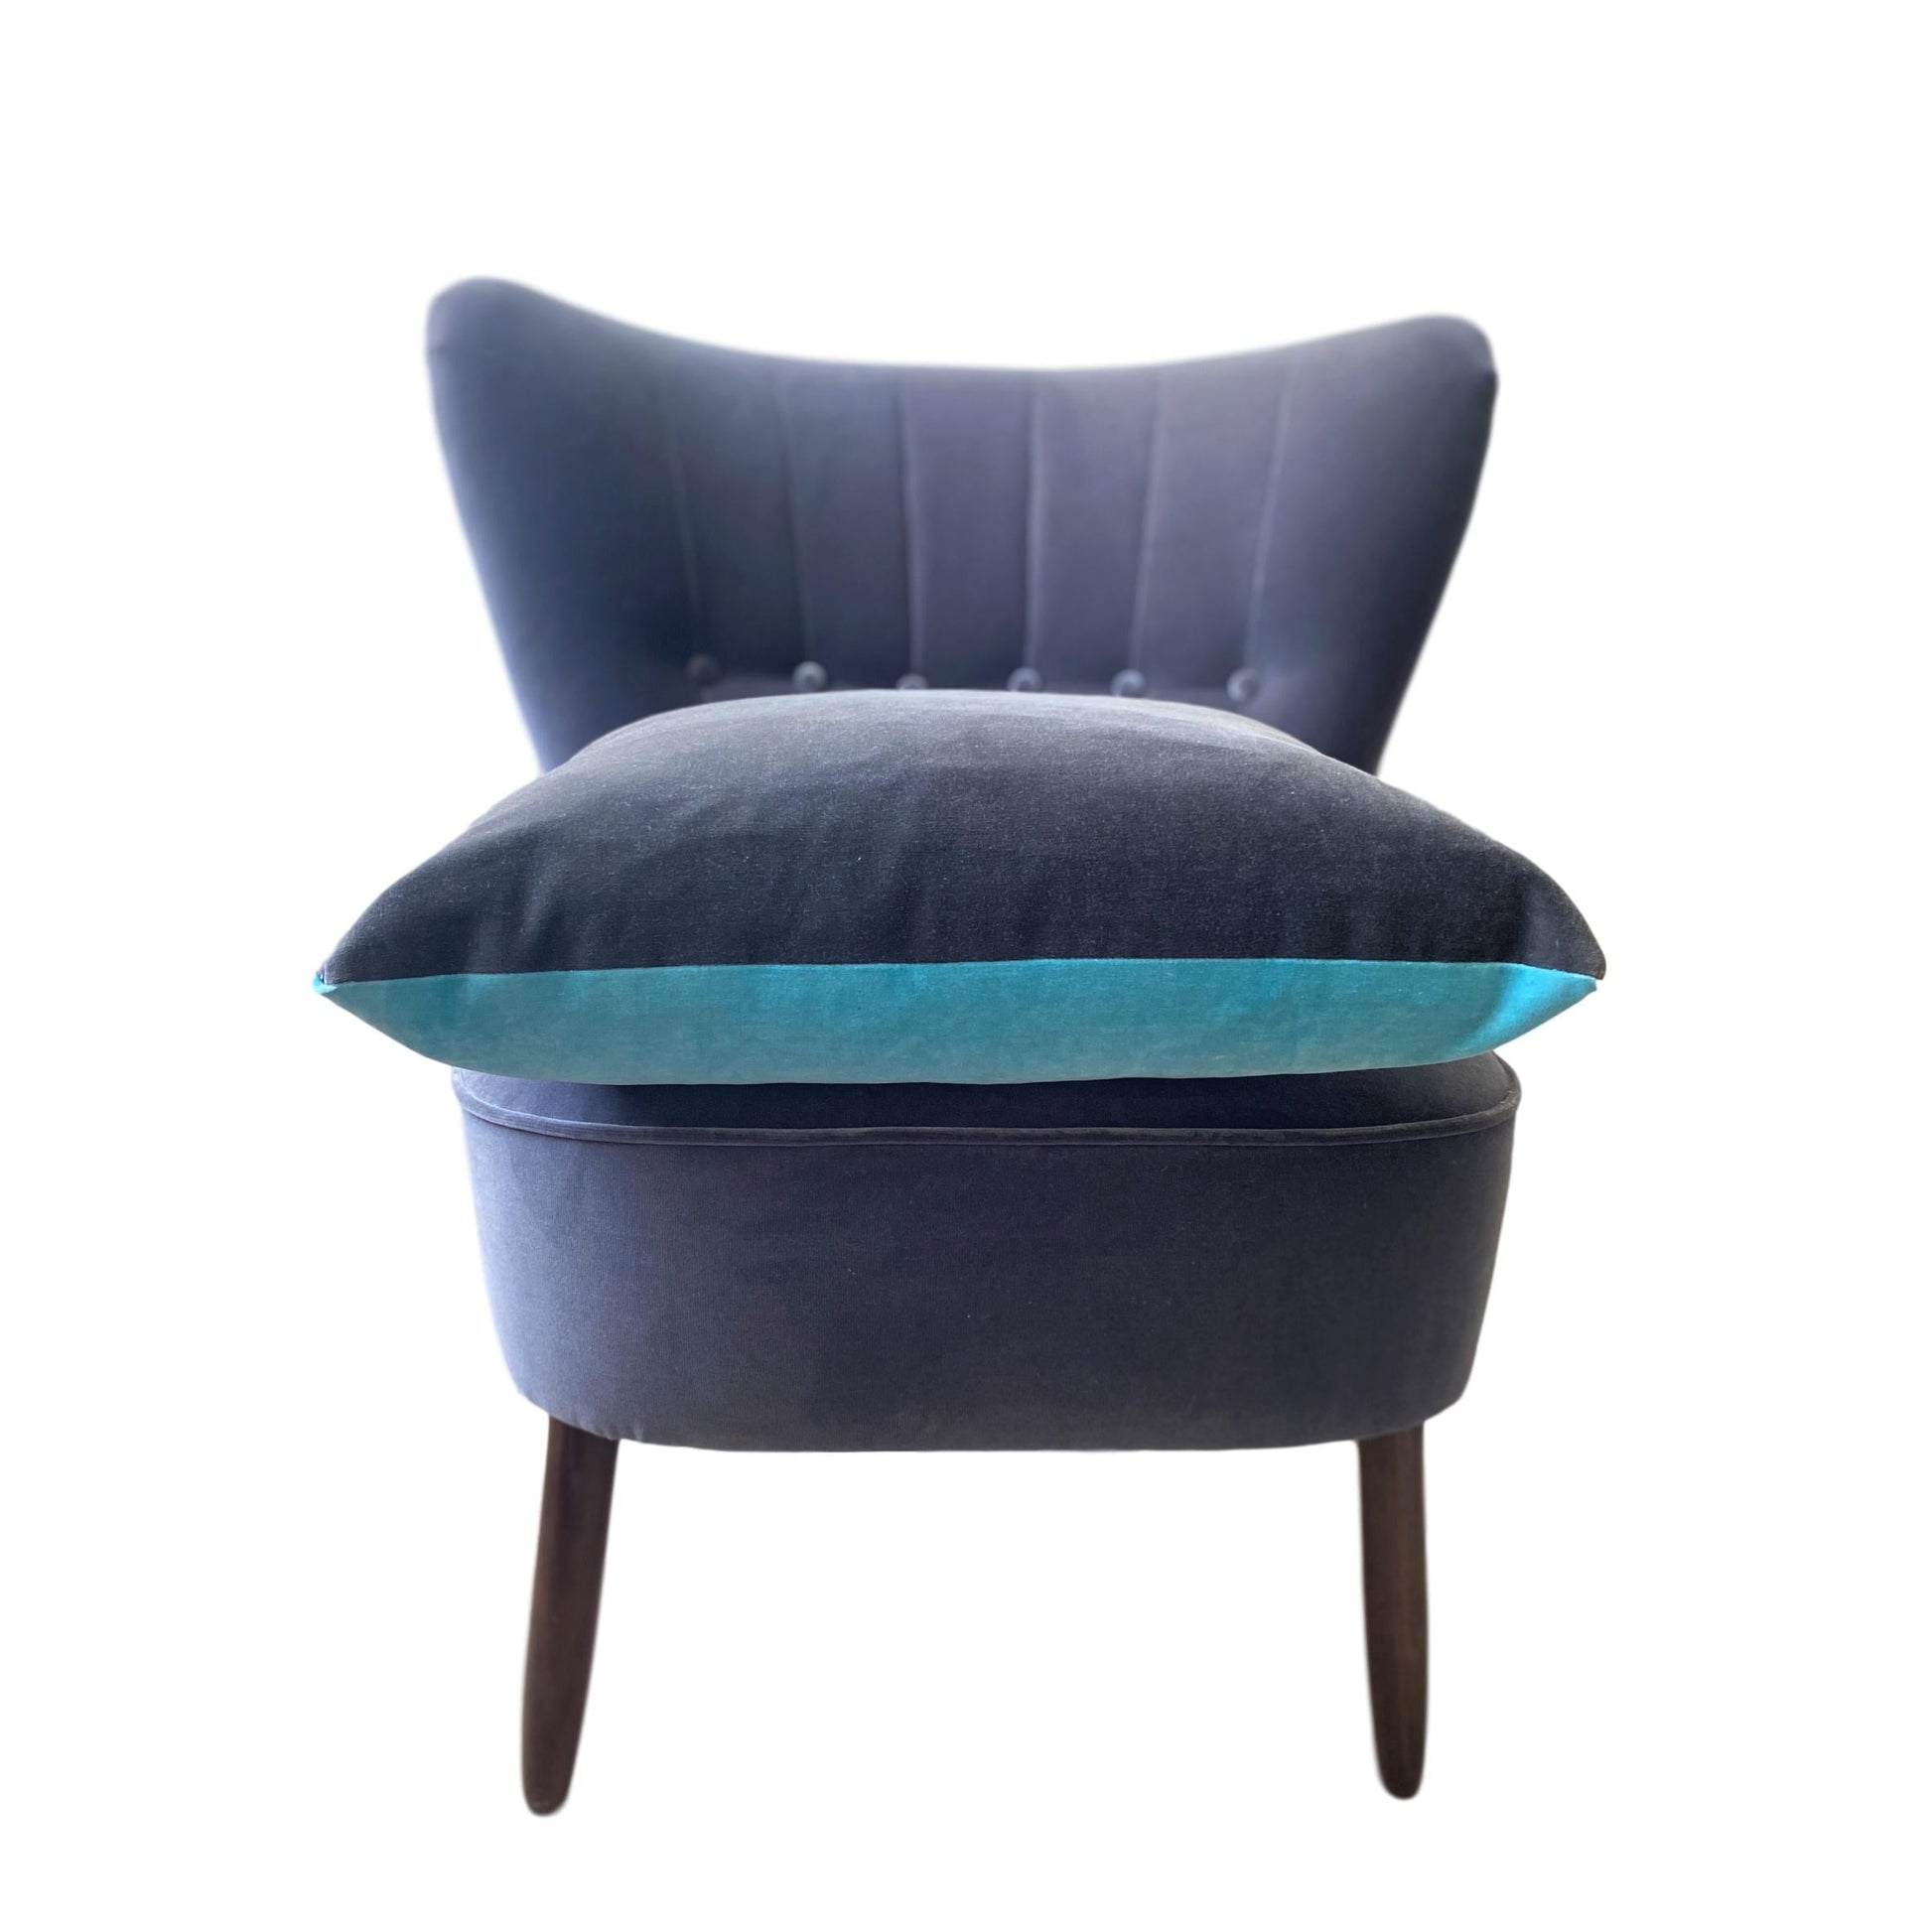 Cushions 60cm x 60cm in turquoise and dark grey by Luxe 39